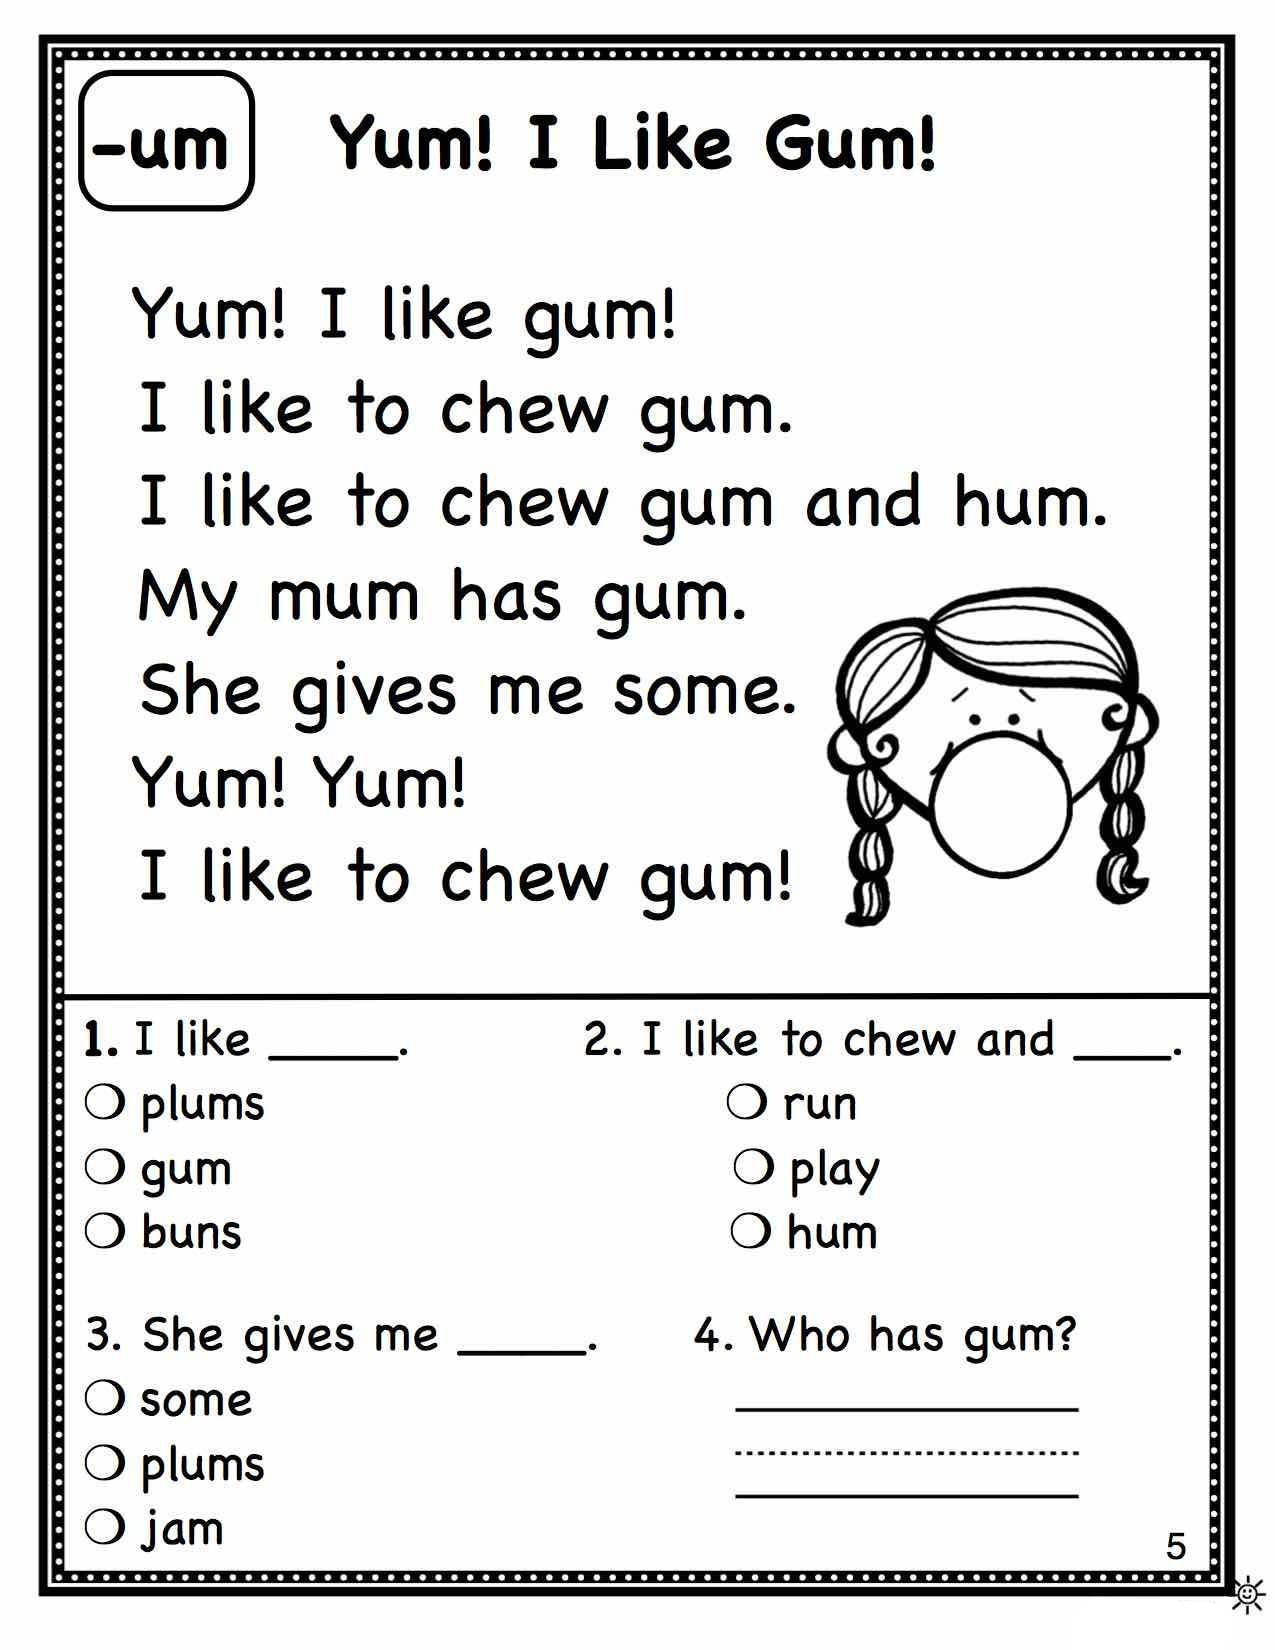 printable-first-grade-worksheets-adding-our-educational-worksheets-to-your-curriculum-should